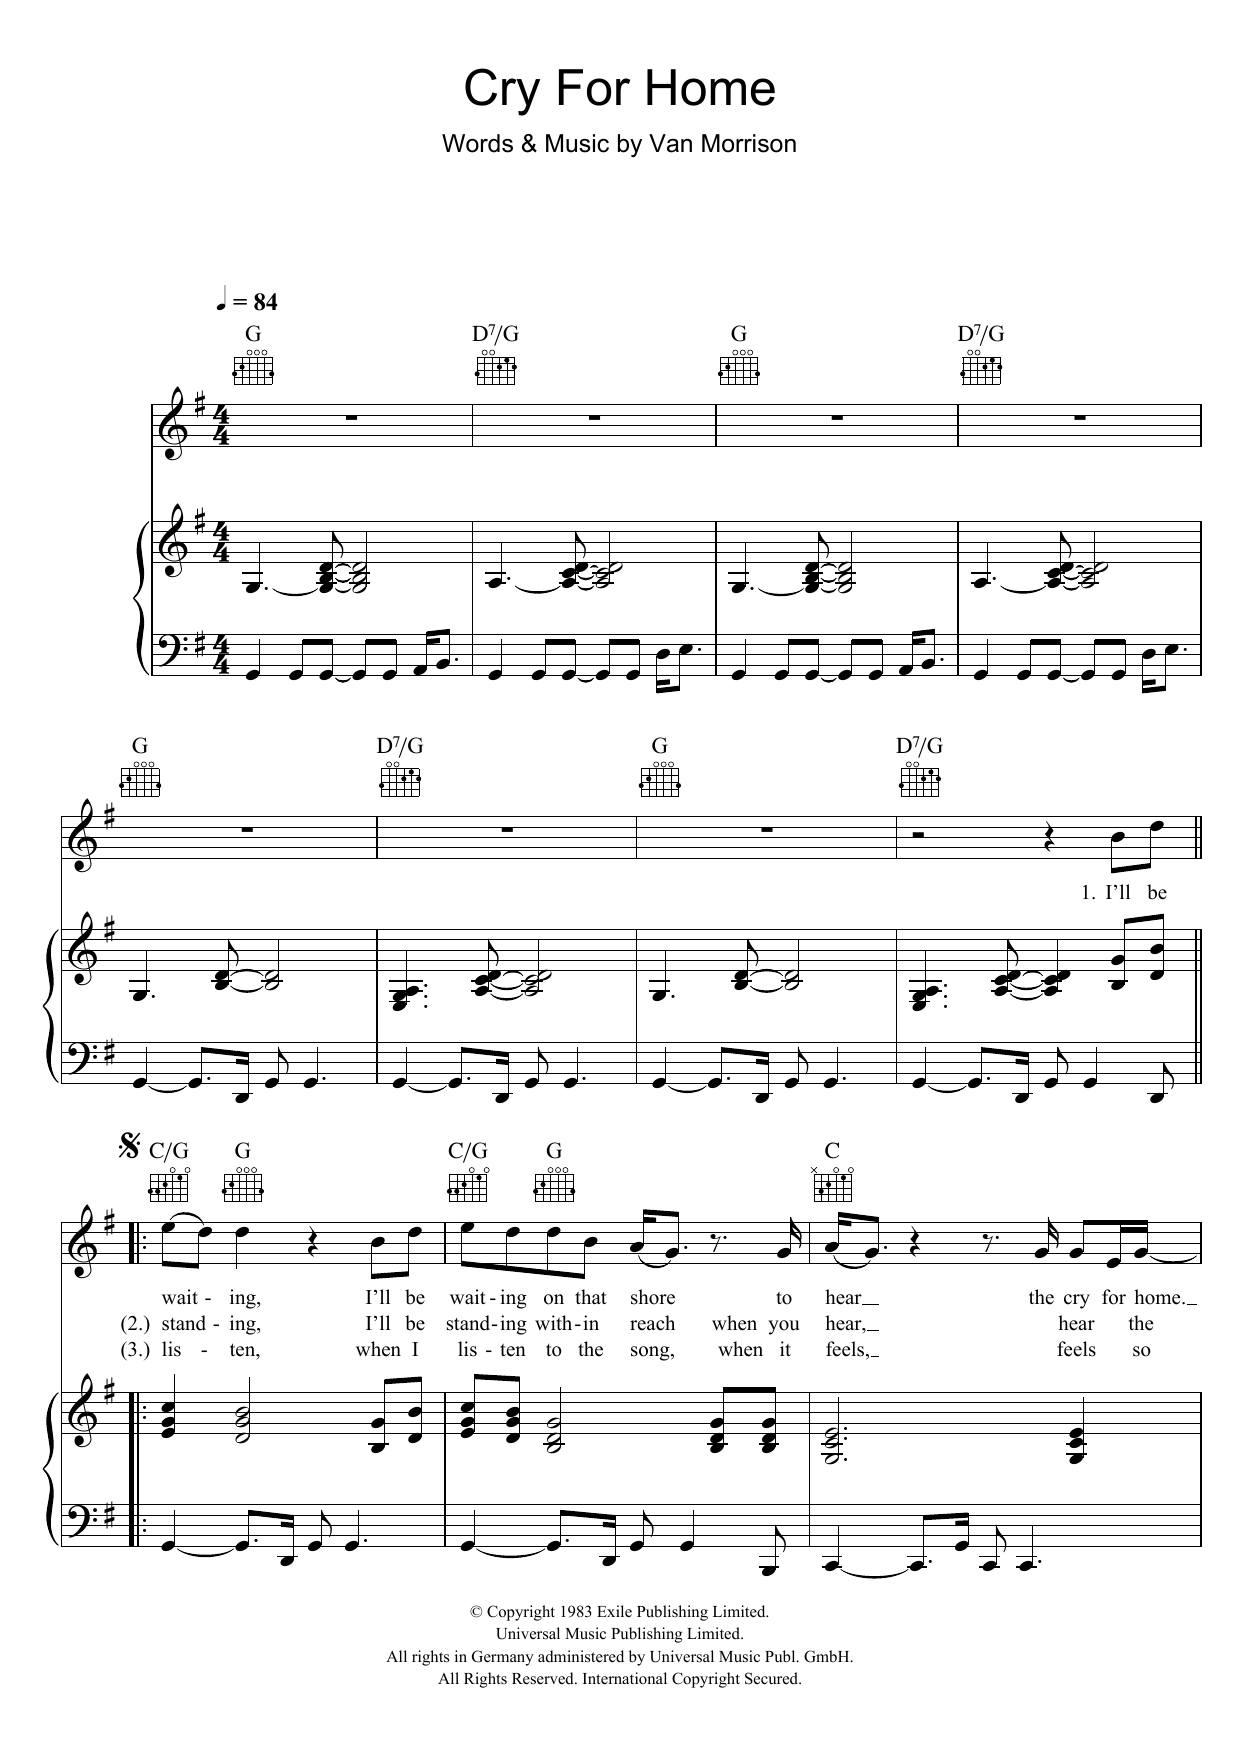 Download Van Morrison Cry For Home Sheet Music